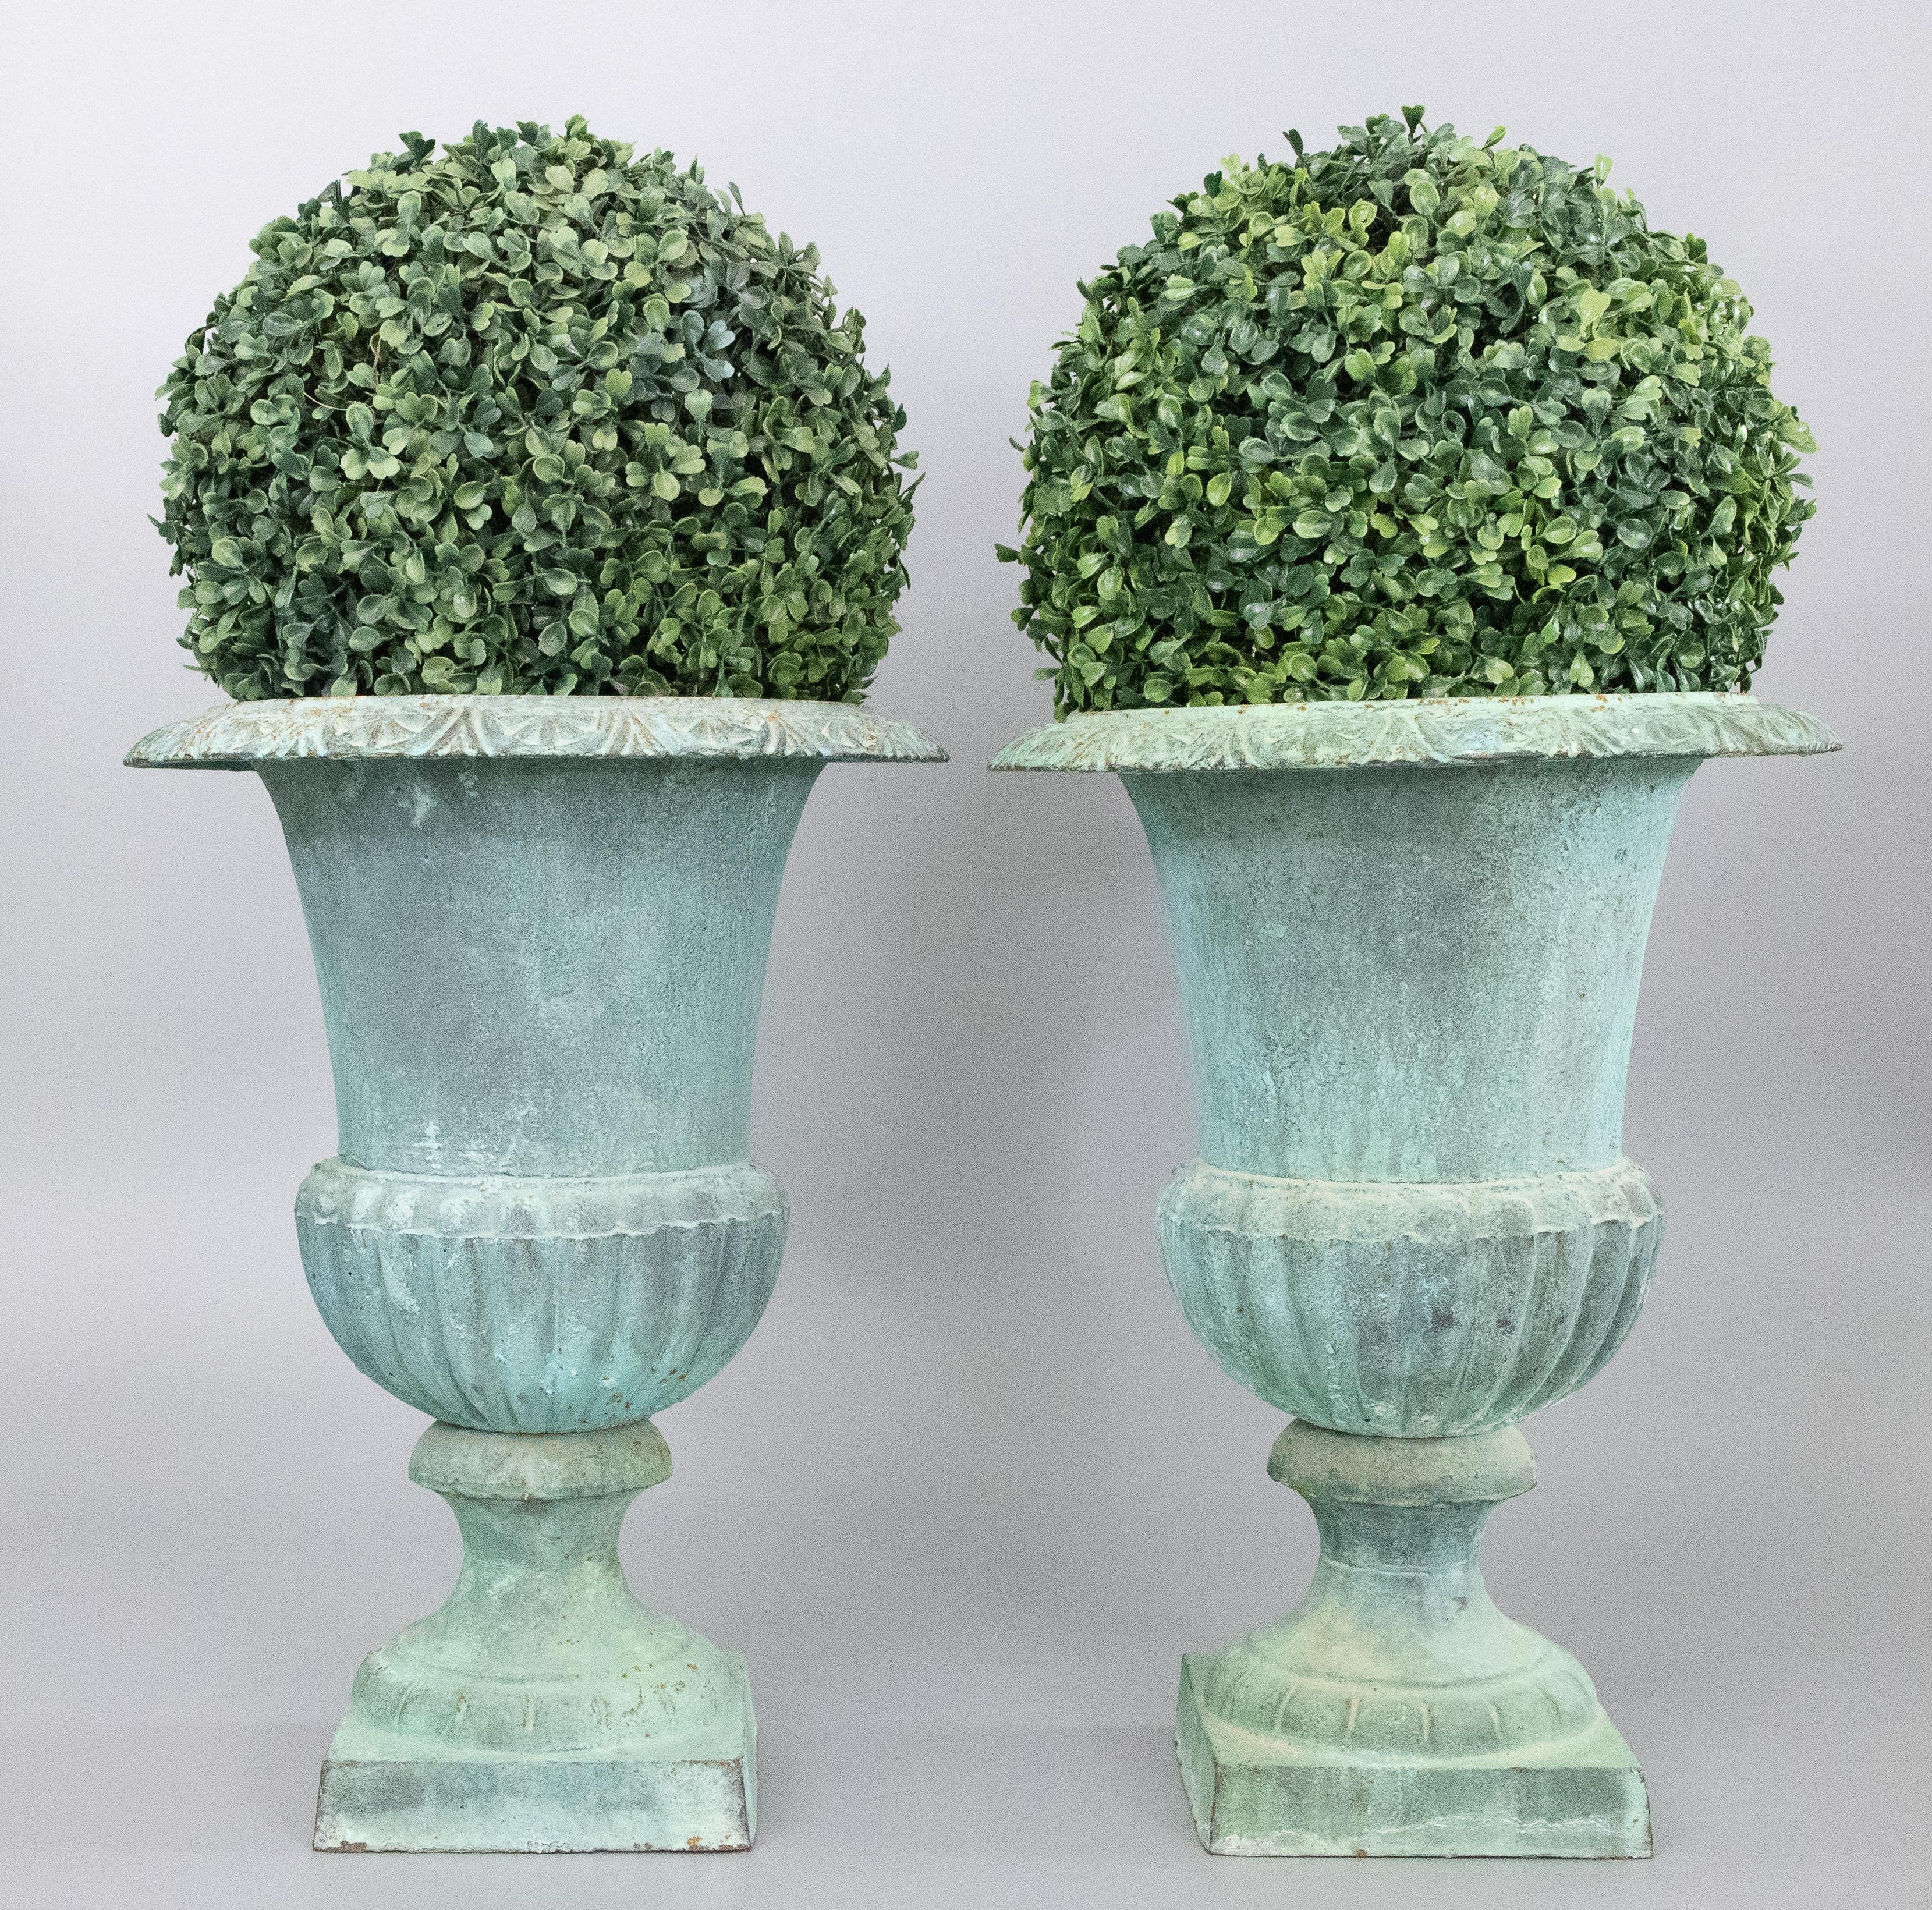 A superb large pair of vintage French Neoclassical style cast iron garden urns or planters in a lovely light verdigris color. These beautiful jardinieres are a nice large size, solid and heavy, and would be fabulous displayed indoors or outdoors.